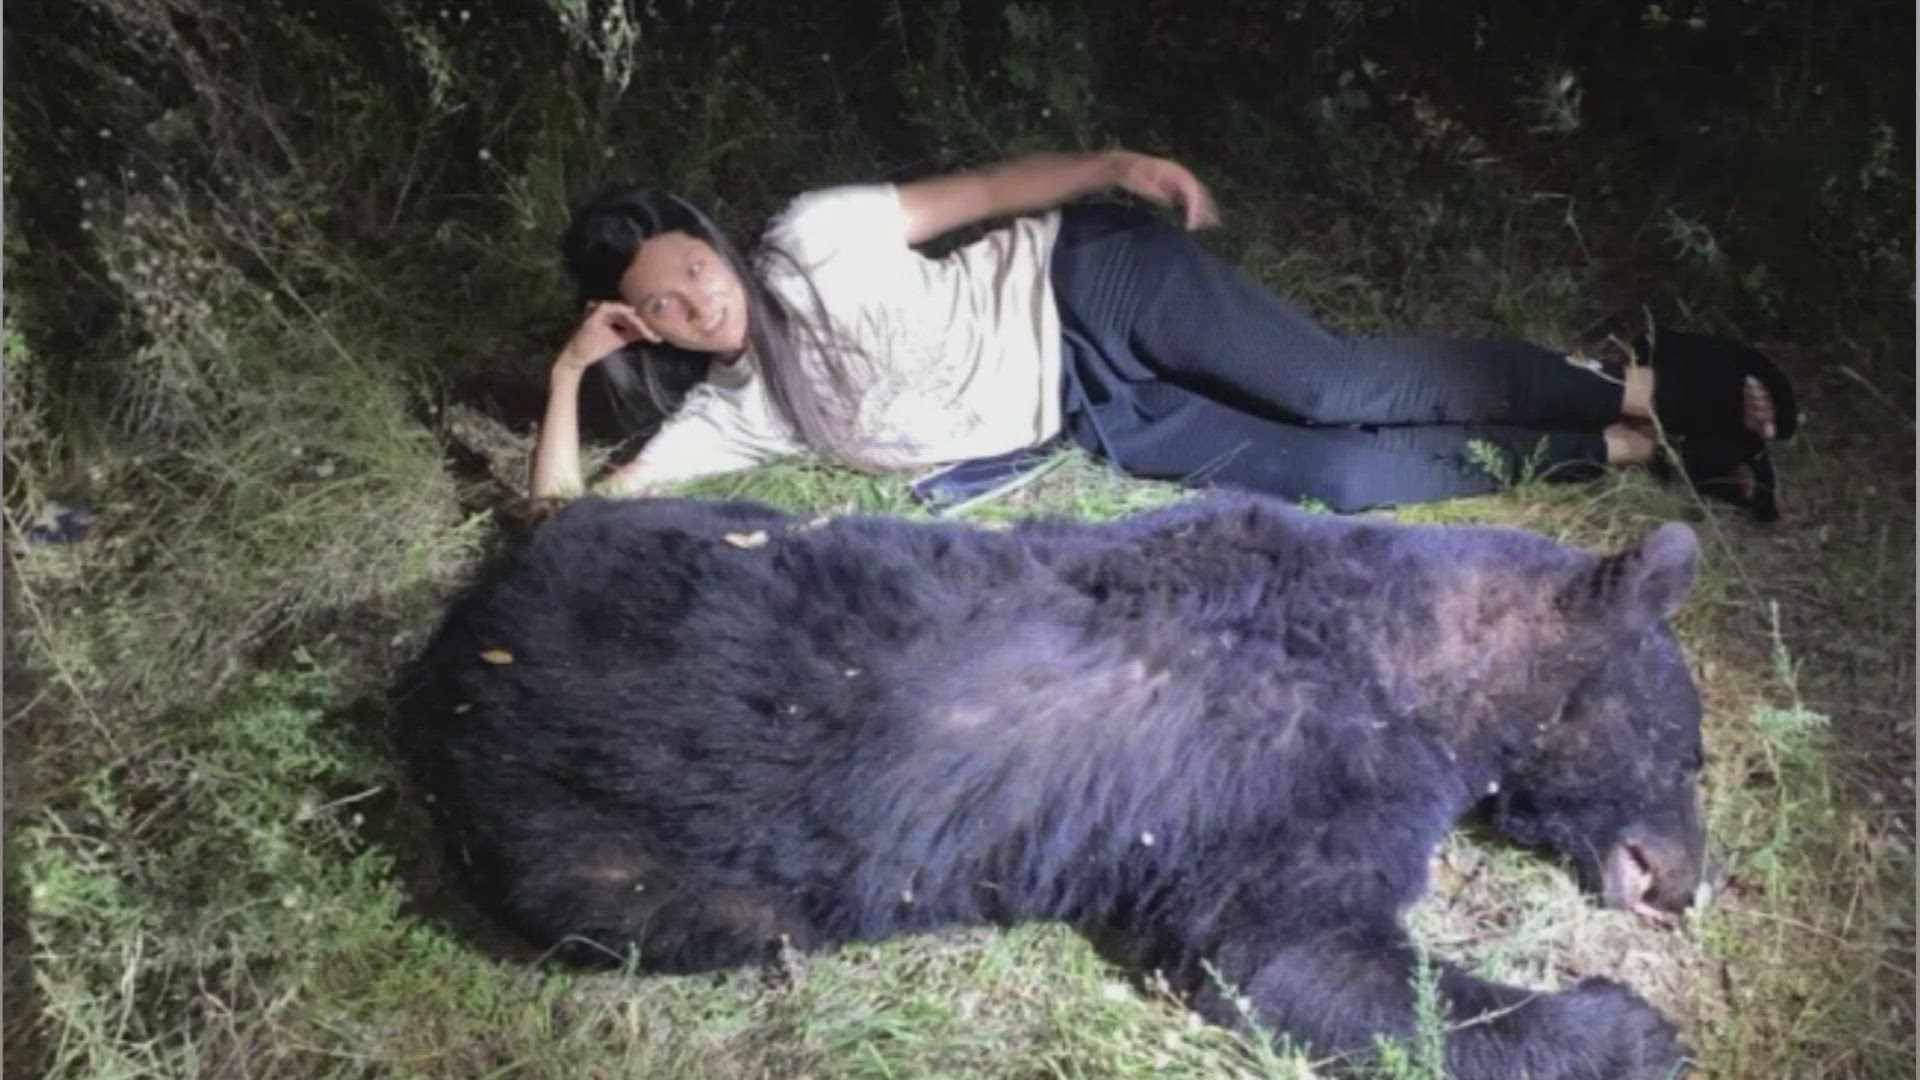 Woman collides with rare black bear on Texas road